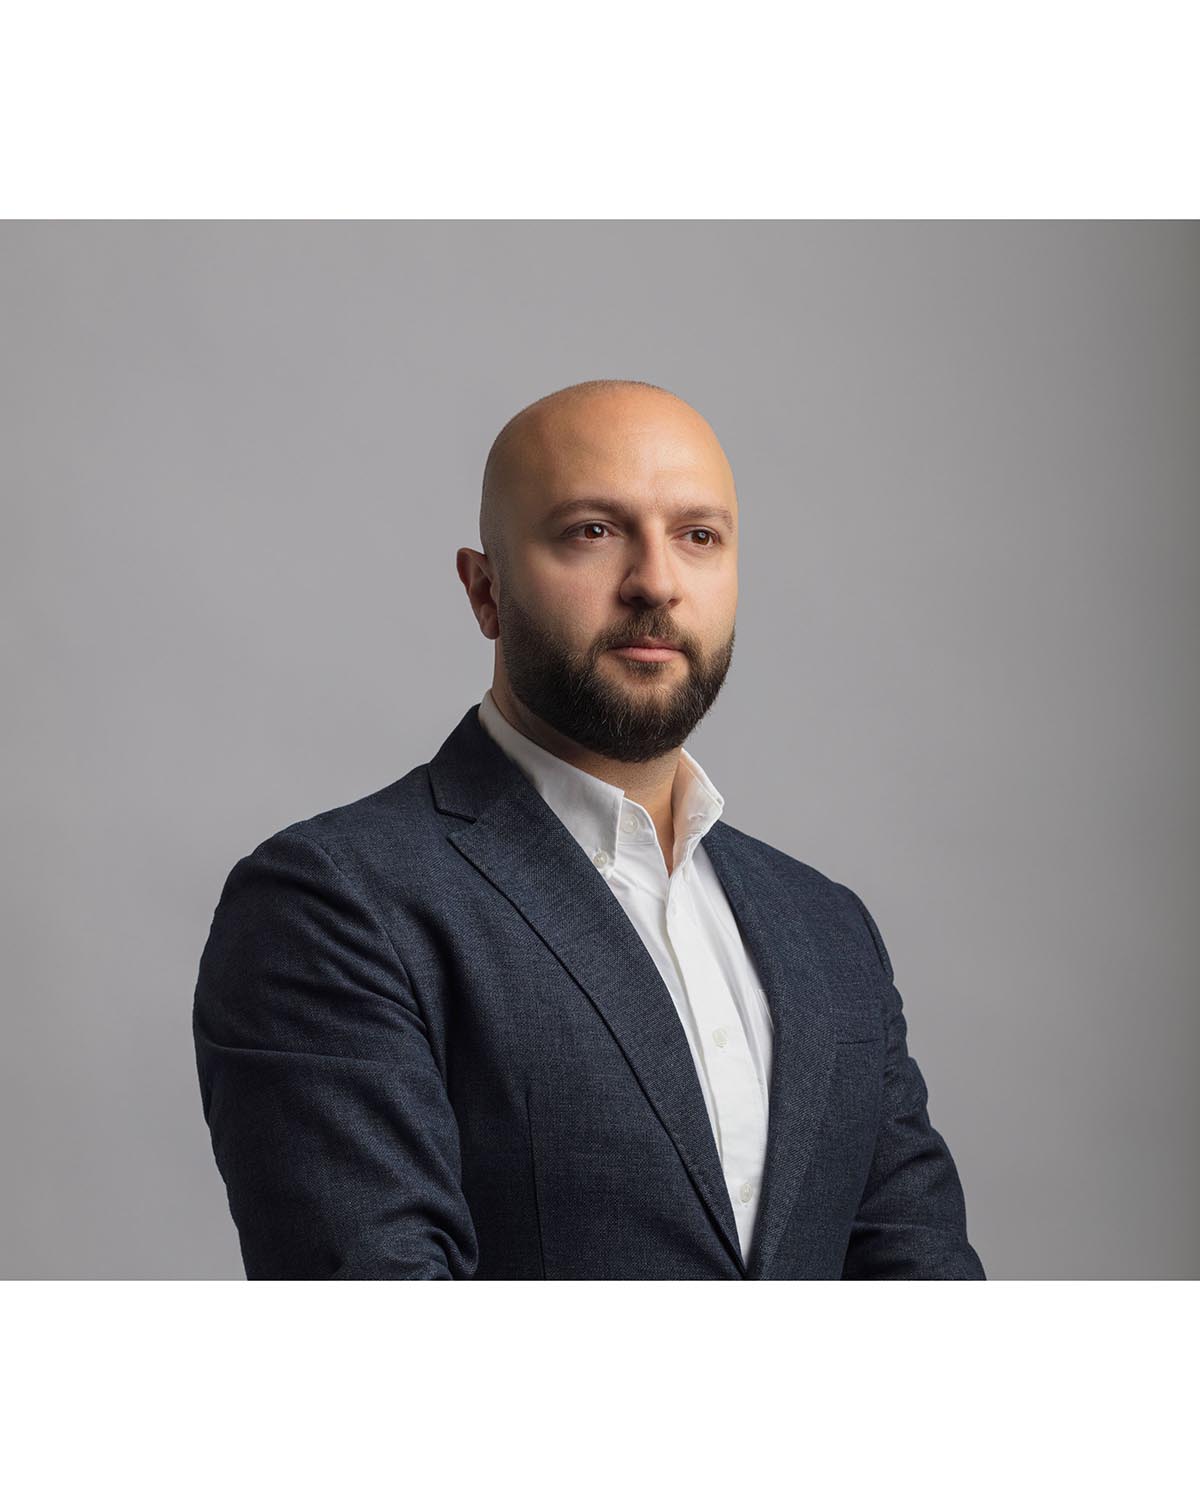 Publicis Groupe ME&T elevates Abed Ismail to  Head of Integration